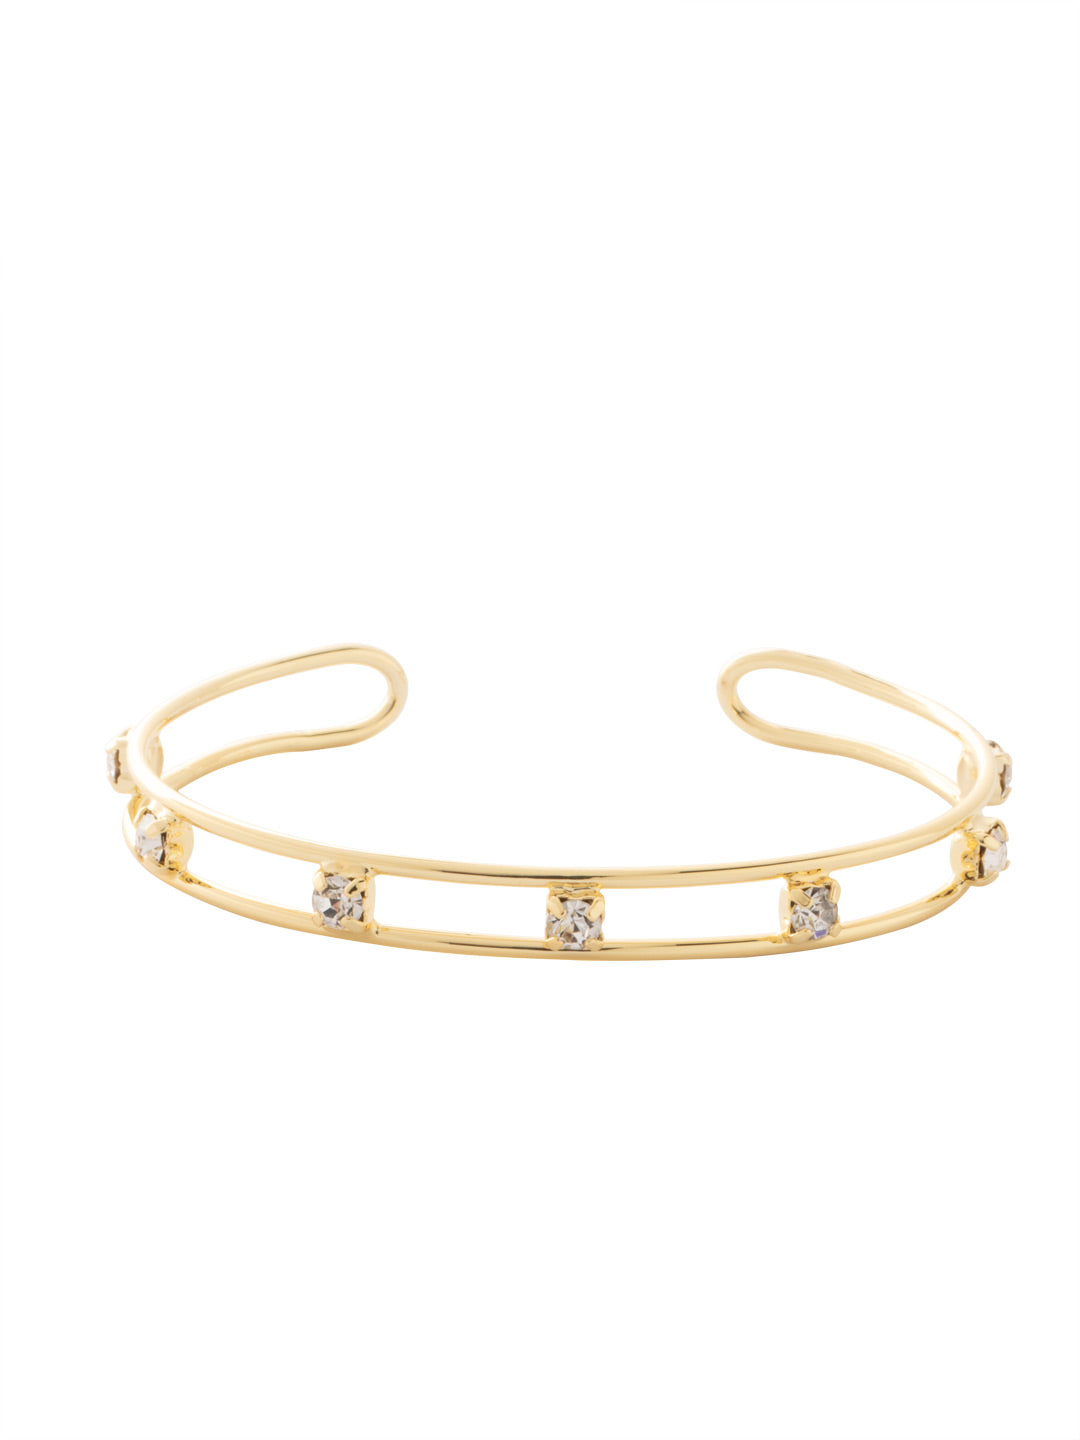 Aerie Cuff Bracelet - BFM6BGCRY - <p>The Aerie Cuff Bracelet features an open adjustable cuff band studded with round cut crystals. From Sorrelli's Crystal collection in our Bright Gold-tone finish.</p>